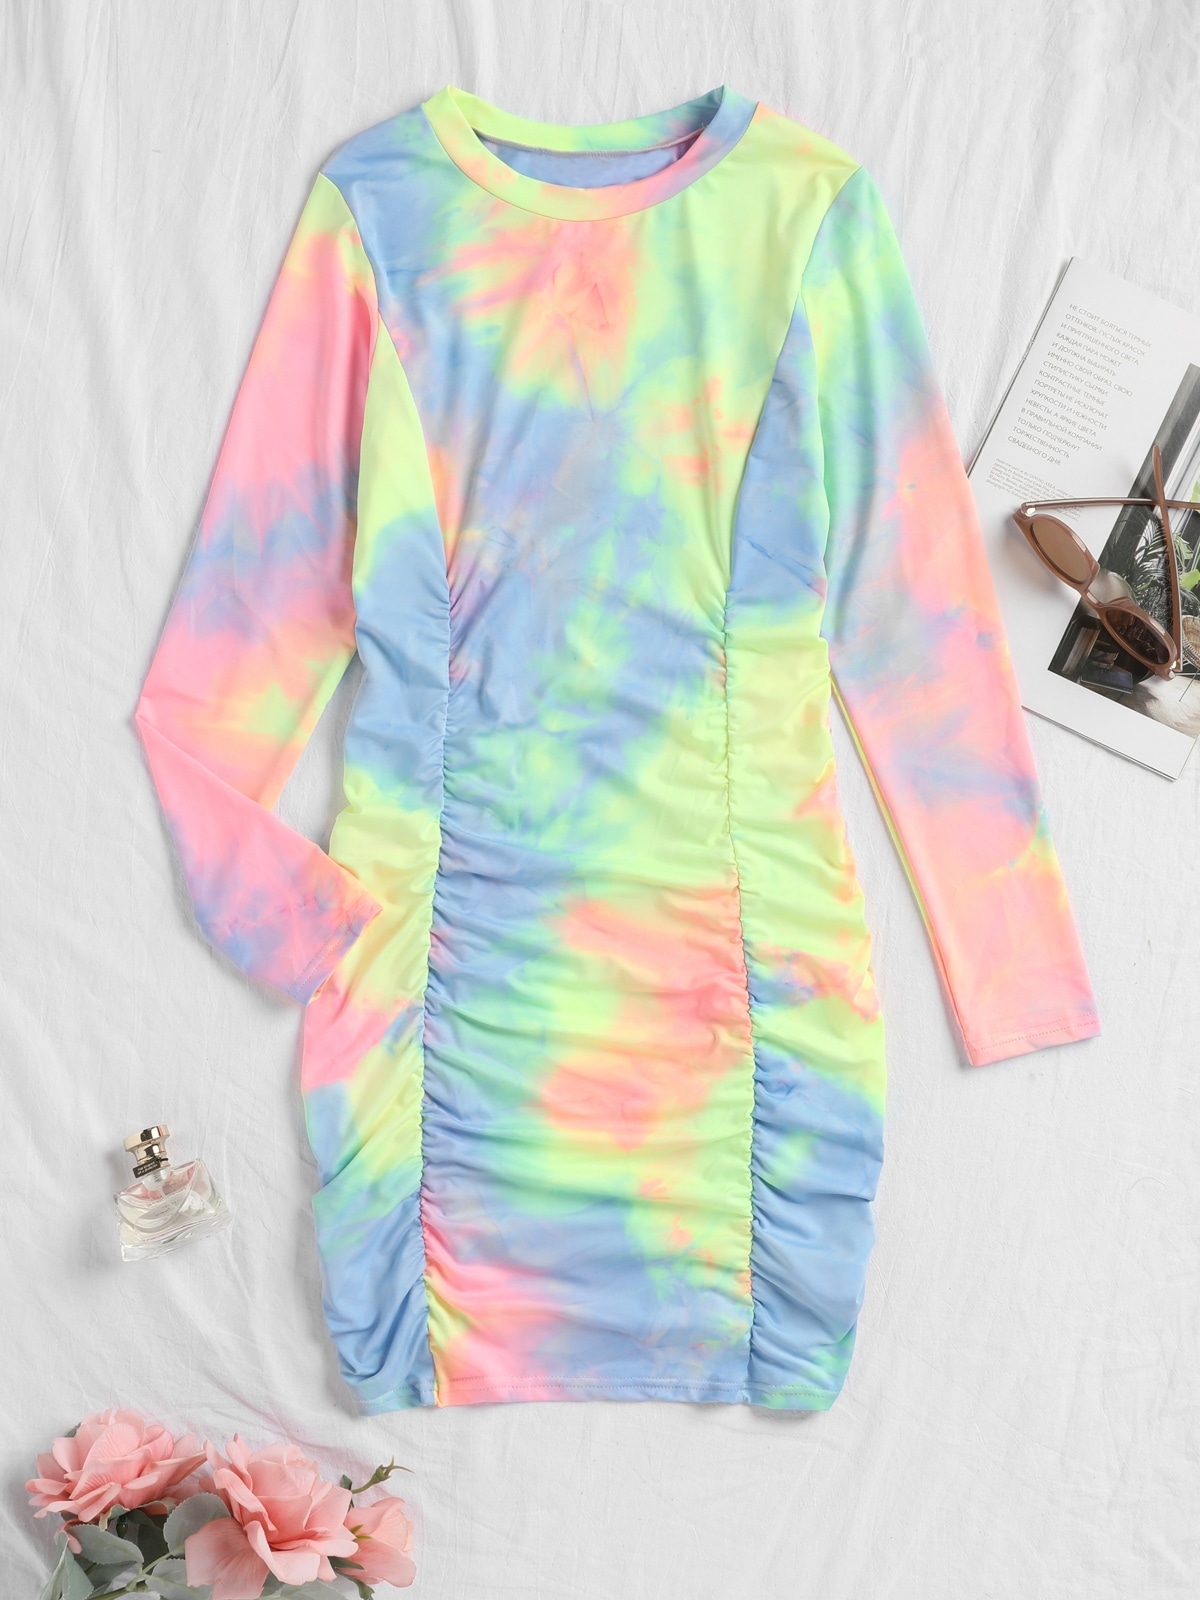 Best Tie-Dye Gifts | OnPoint Gift Ideas